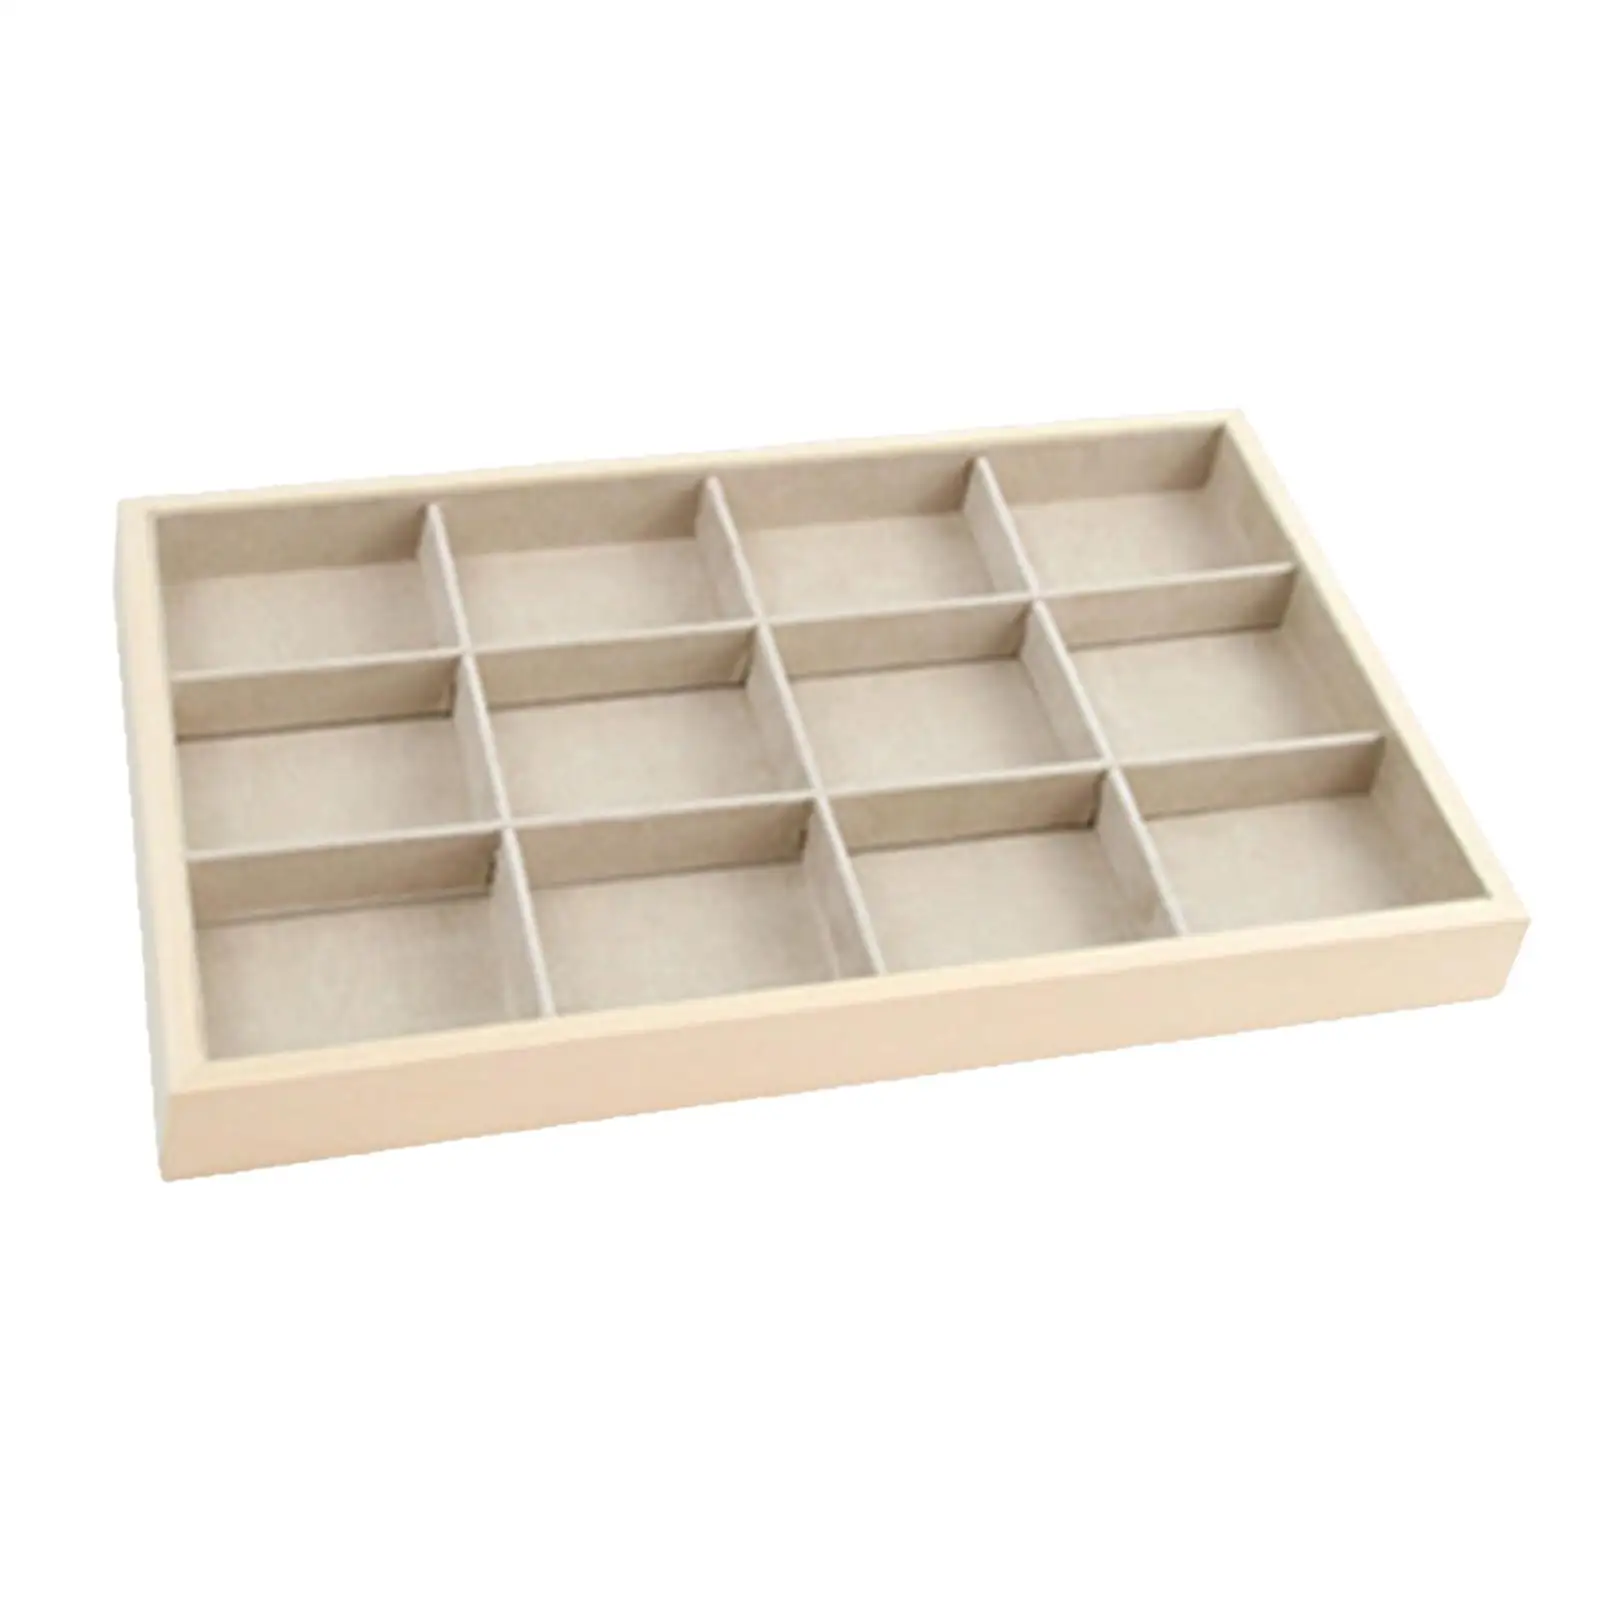 Stackable Jewelry Tray Inserts Storage Display Container Organiser Holder Case Wood for Necklace Bracelet Earring Ring Gemstone